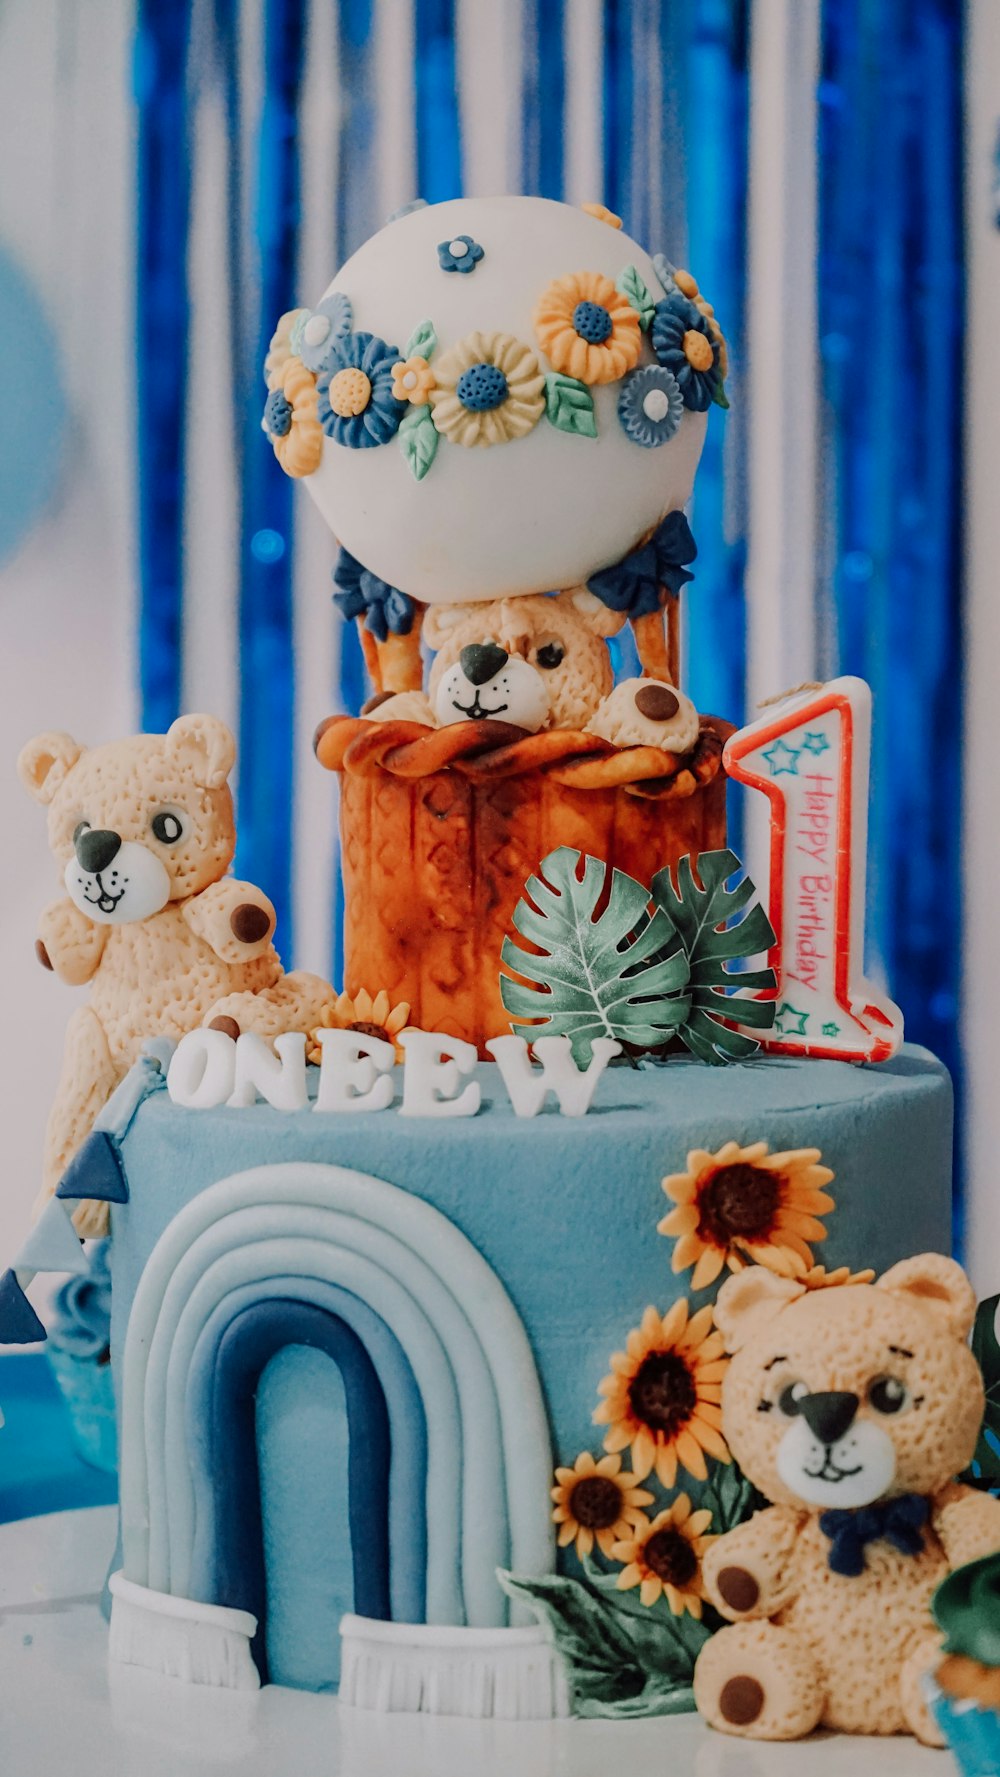 a cake with a bear and flowers